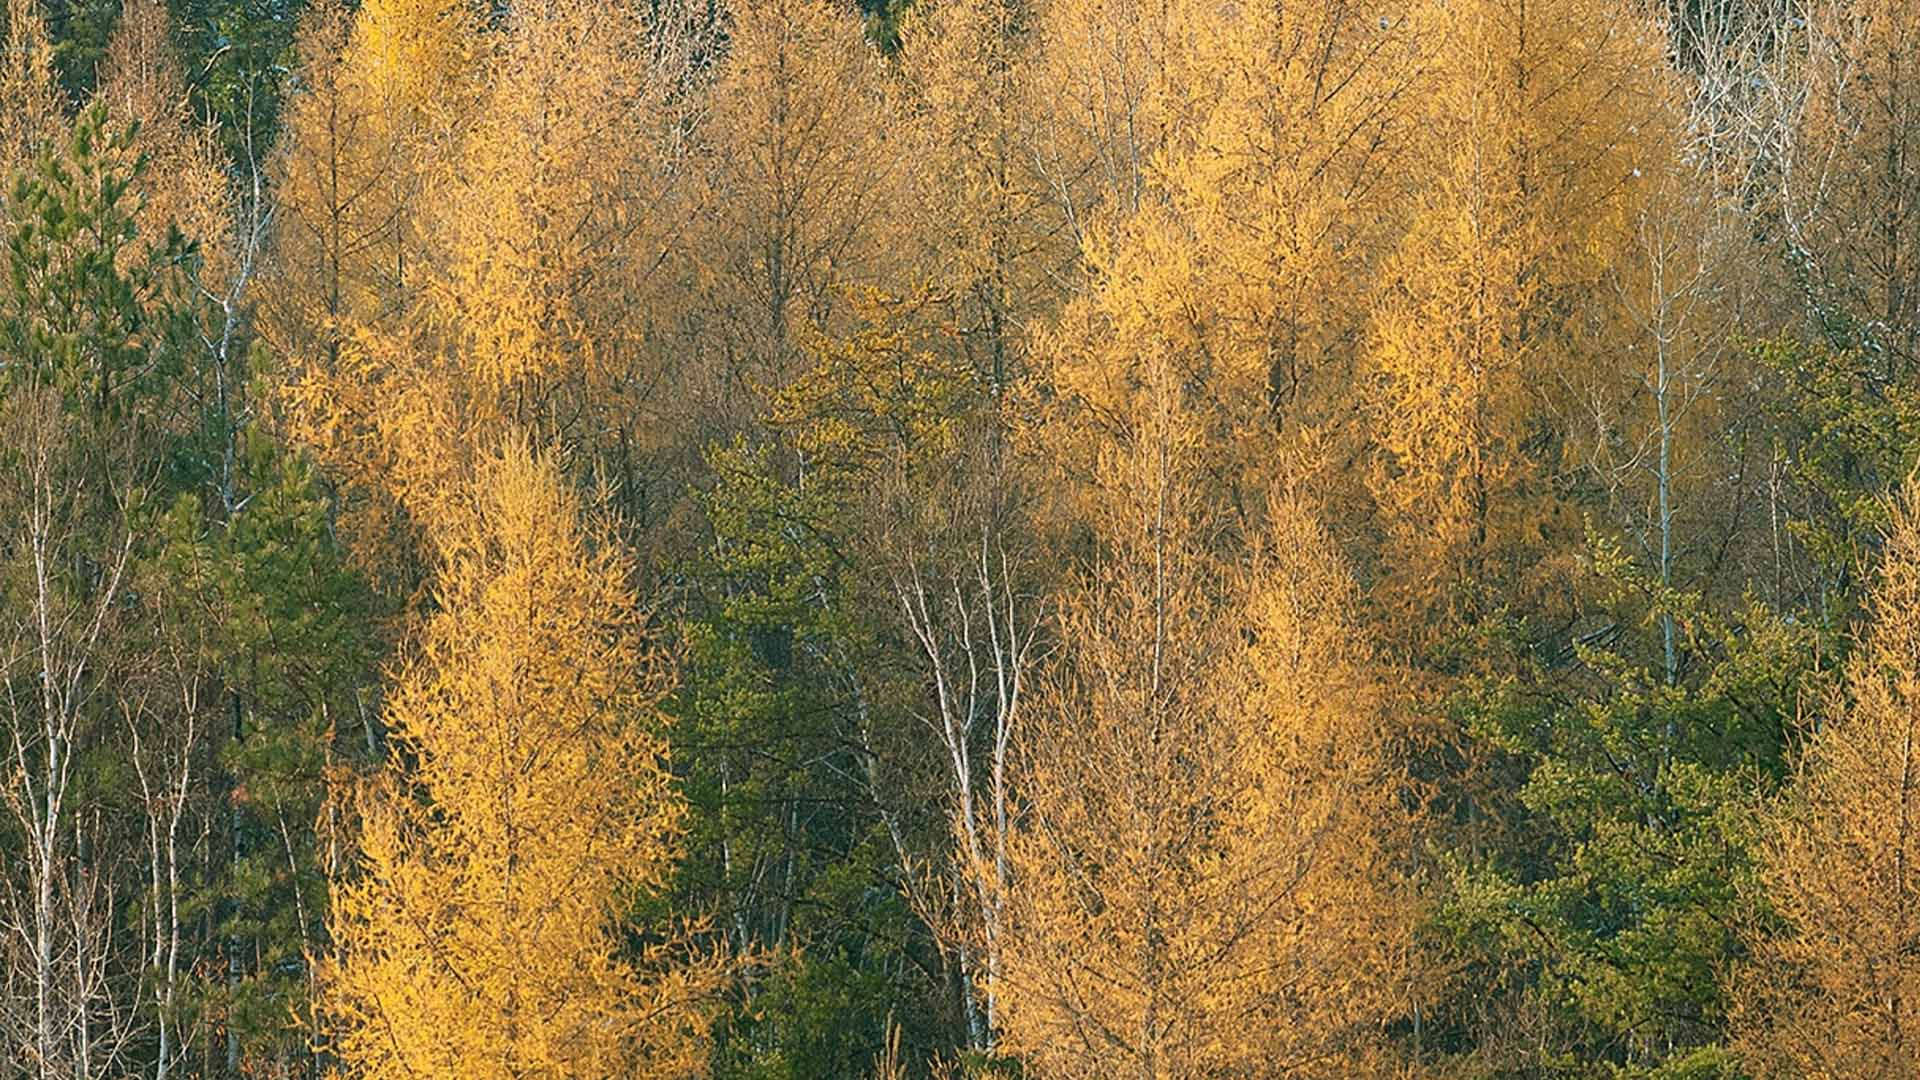 Trees in green and yellow fall colors